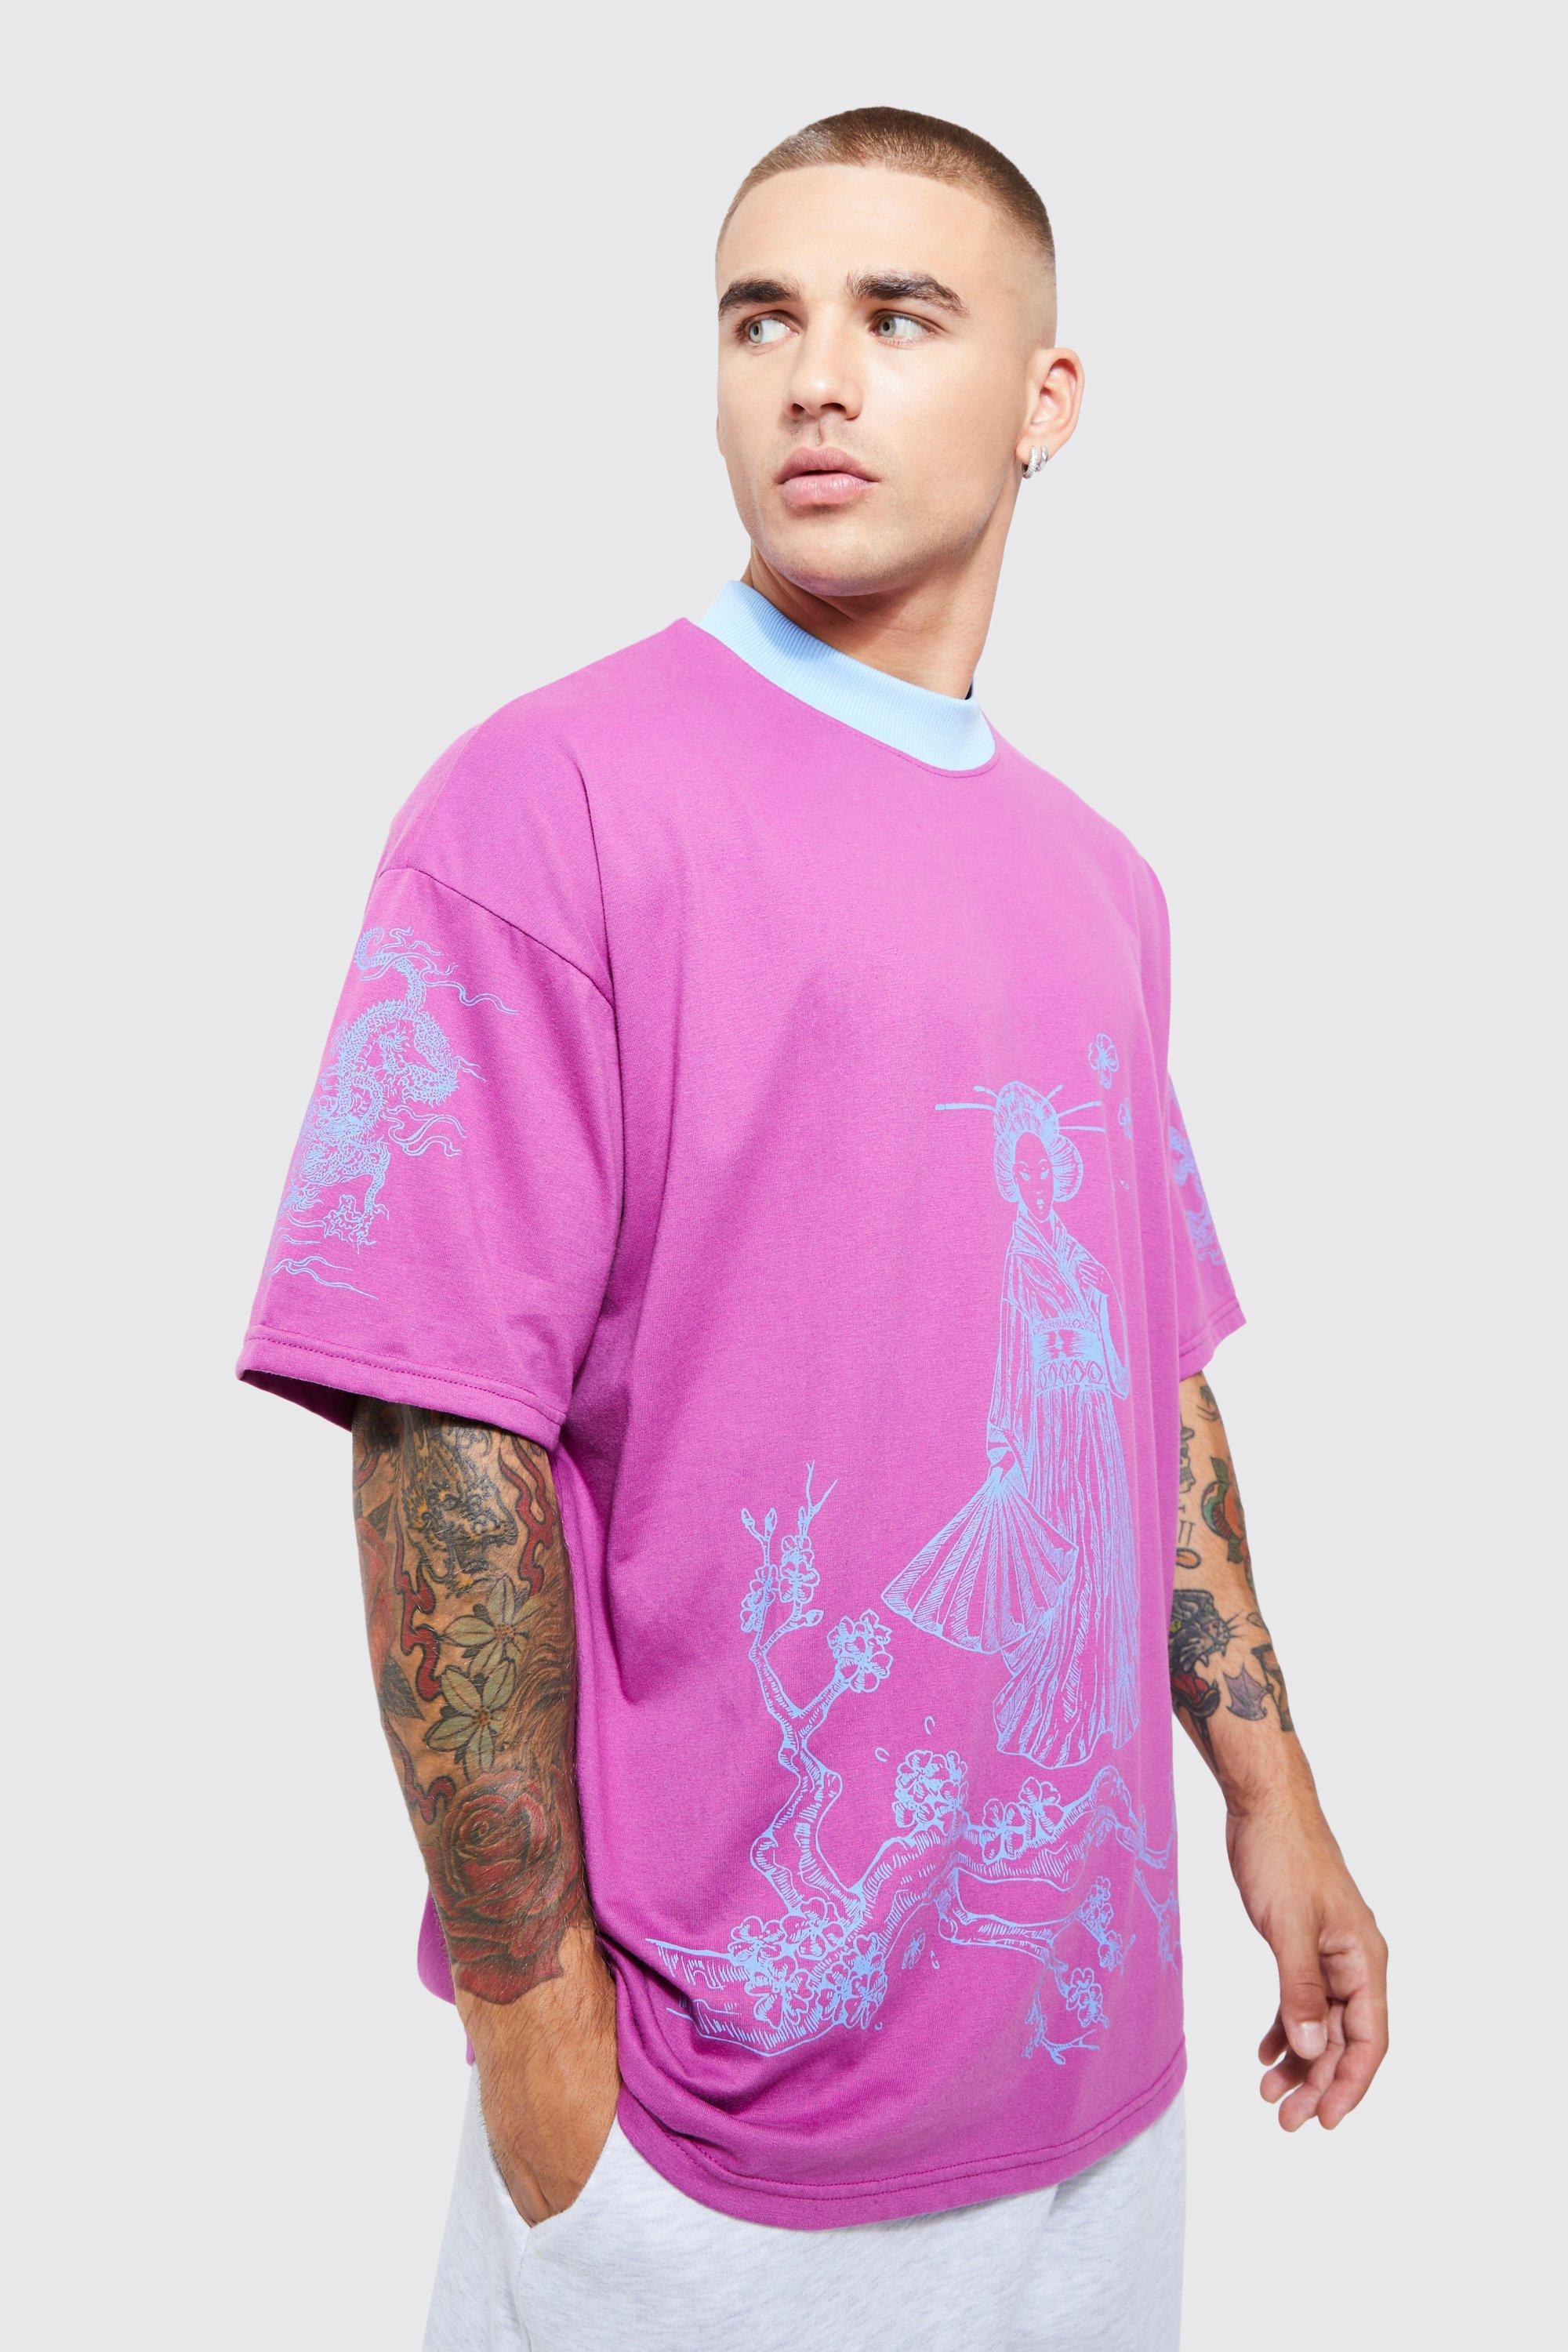 BoohooMAN Oversize Contrast Neck Blossom Graphic T-shirt in Purple for Men  | Lyst